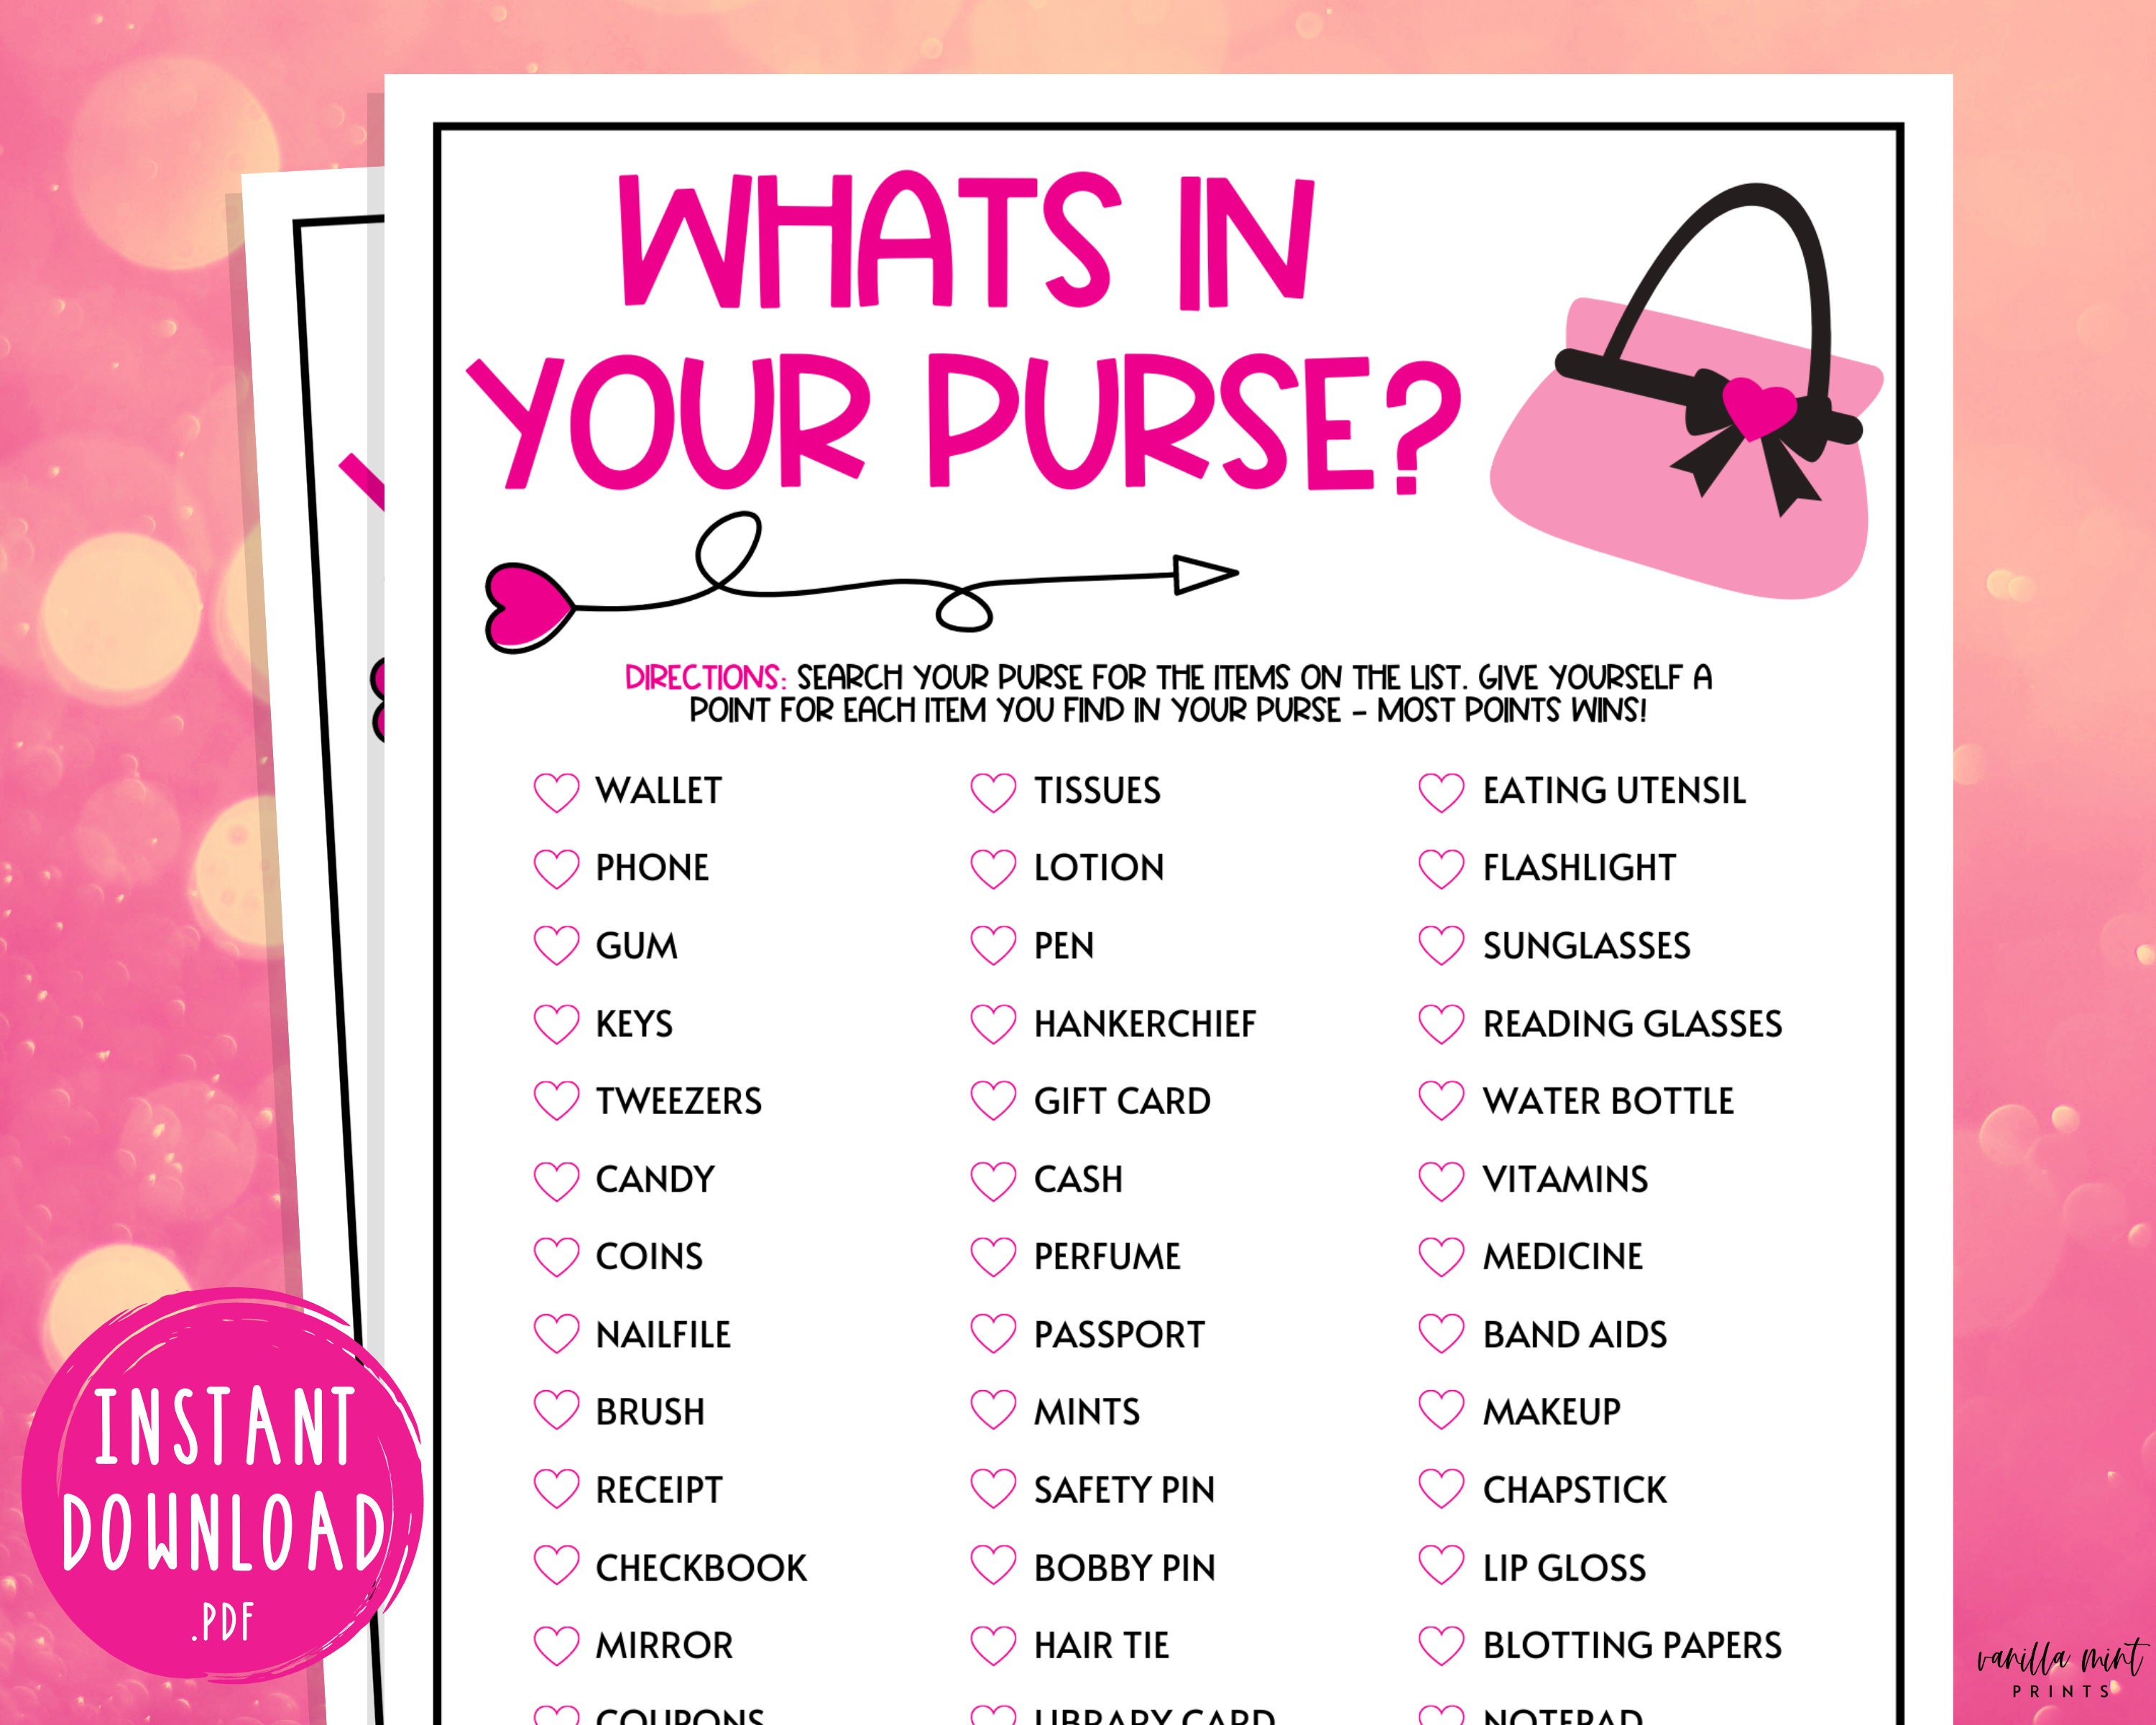 Baby Shower What's In Mom's Purse Printable, Scavenger Hunt, Neutral, Green  Stars, Baby Shower Game, Couples Shower, Gender Reveal | Pam's Party Place